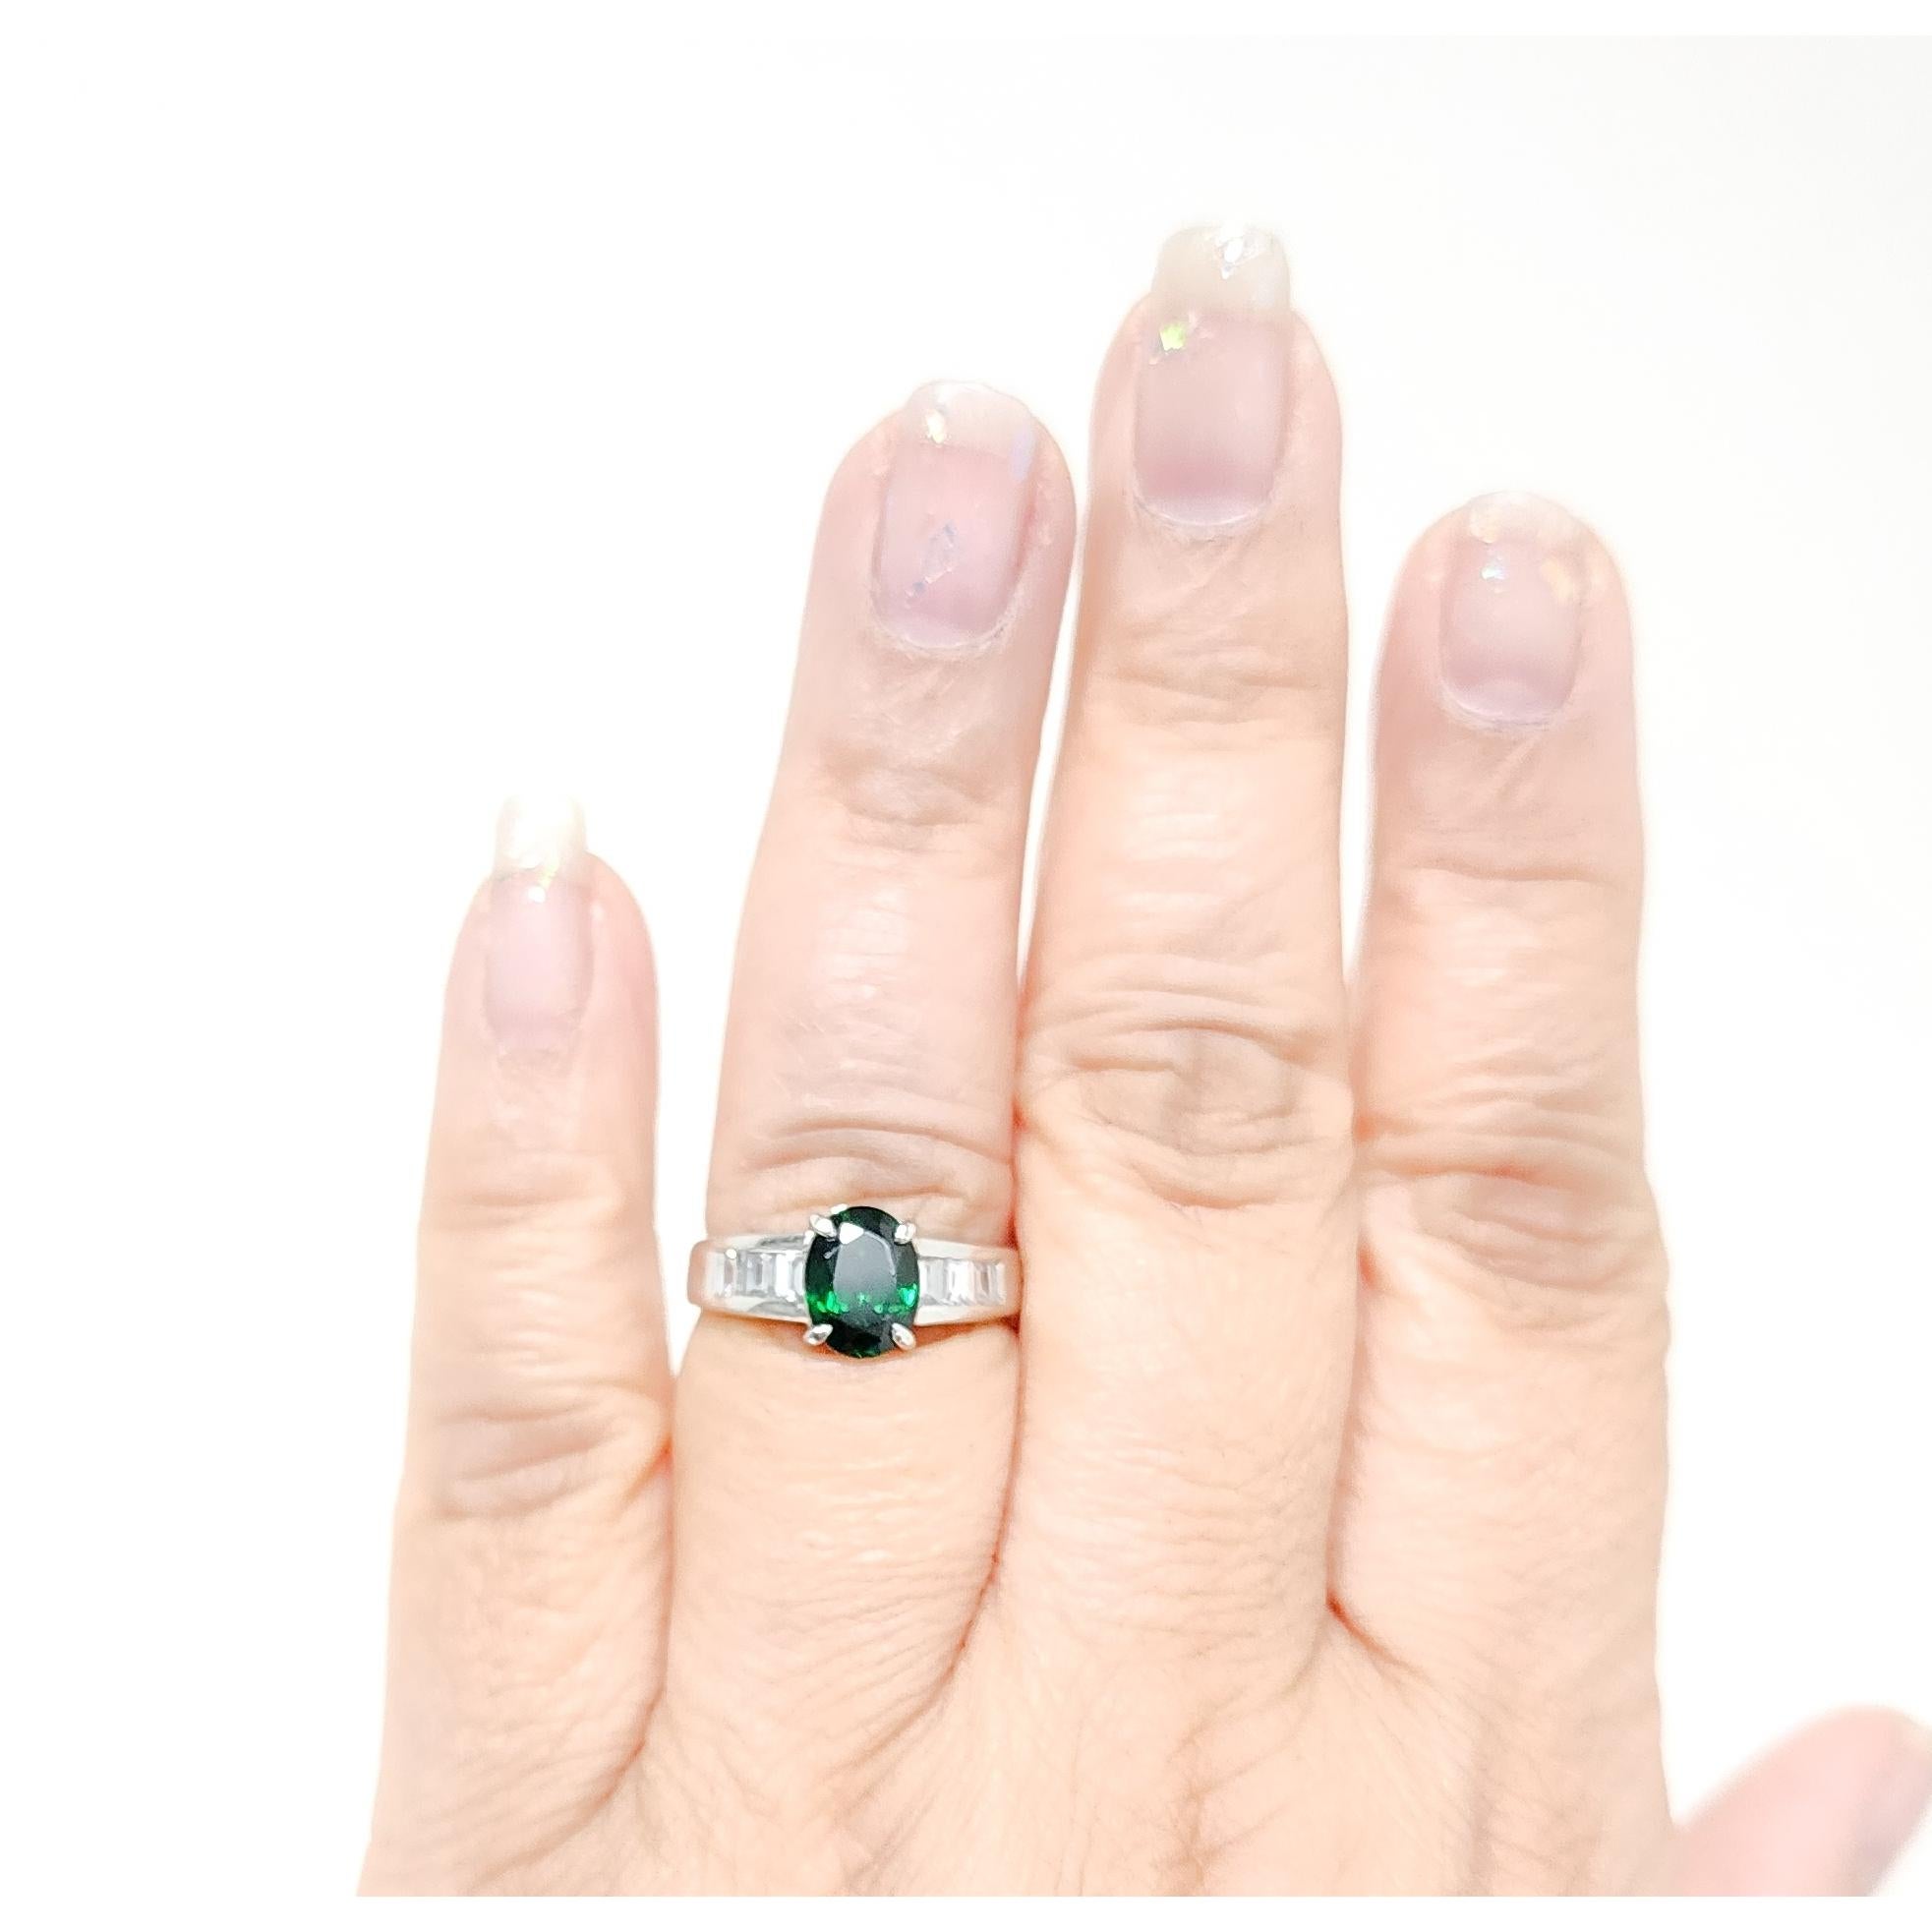 Gorgeous bright green 2.01 ct. green tsavorite garnet oval with 0.55 ct. good quality white diamond baguettes.  Handmade in platinum.  Ring size 7.5.